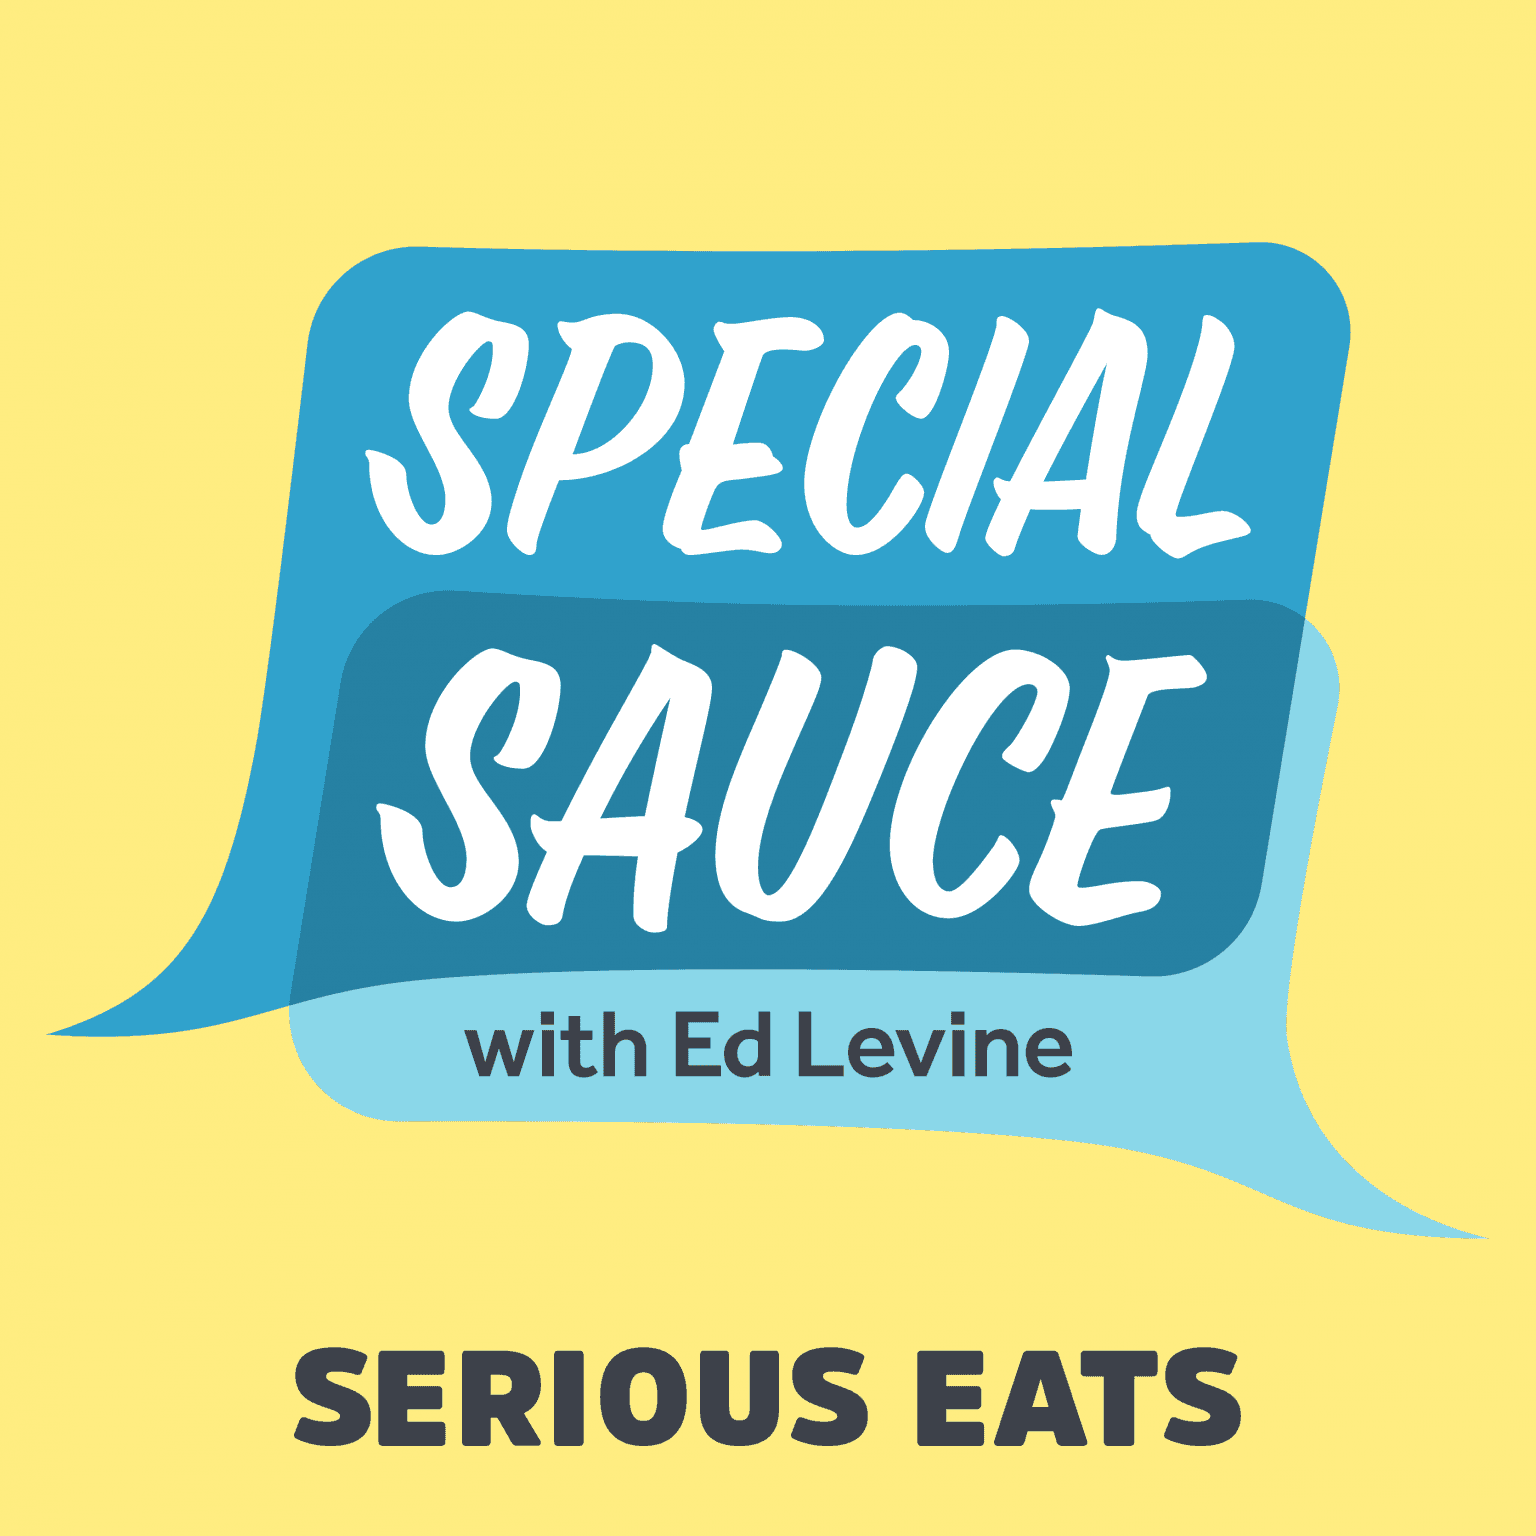 Thumbnail for "Special Sauce: Michael Solomonov and Steven Cook on True Partnership [1/2]".